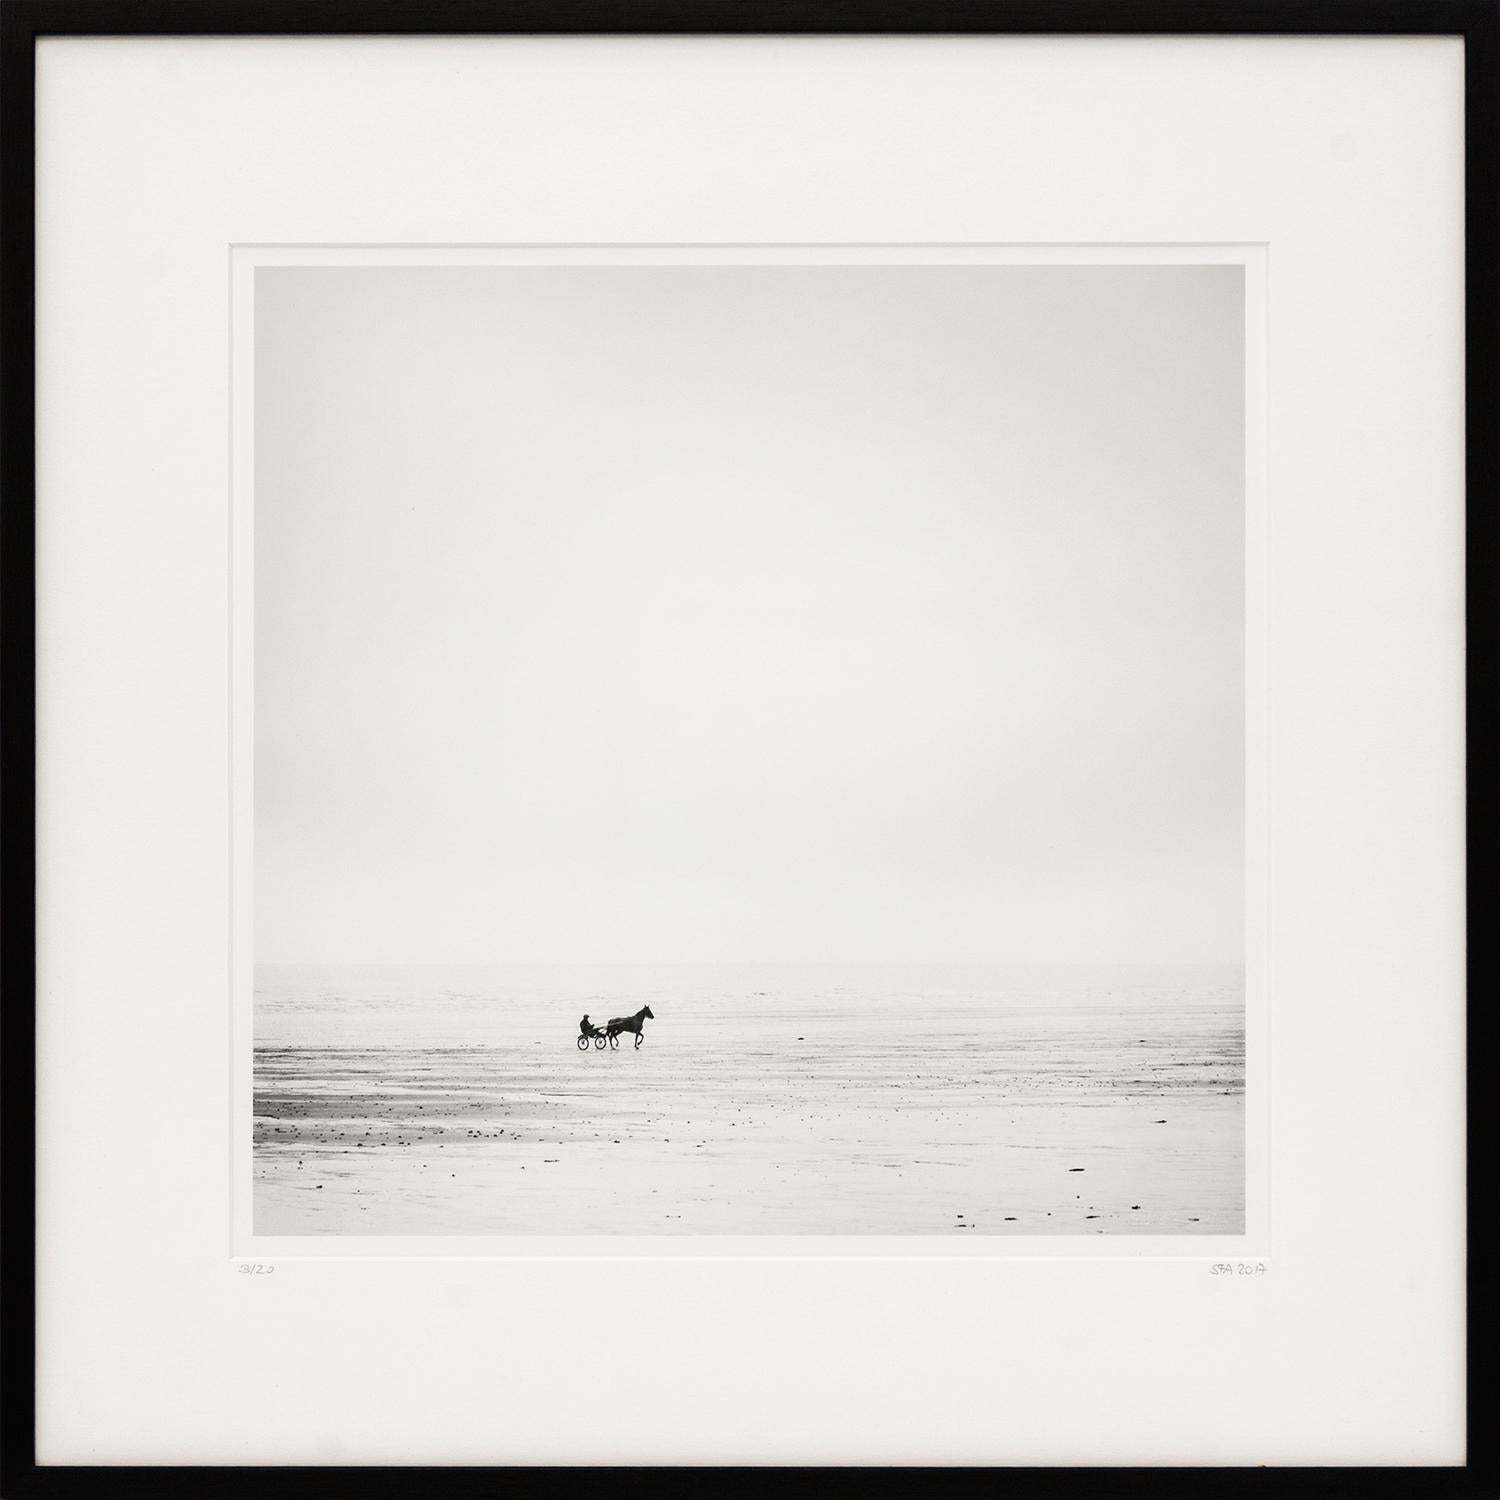 Gerald Berghammer Black and White Photograph - Harness Racing, France, Horse, Beach, black and white art landscape, wood frame